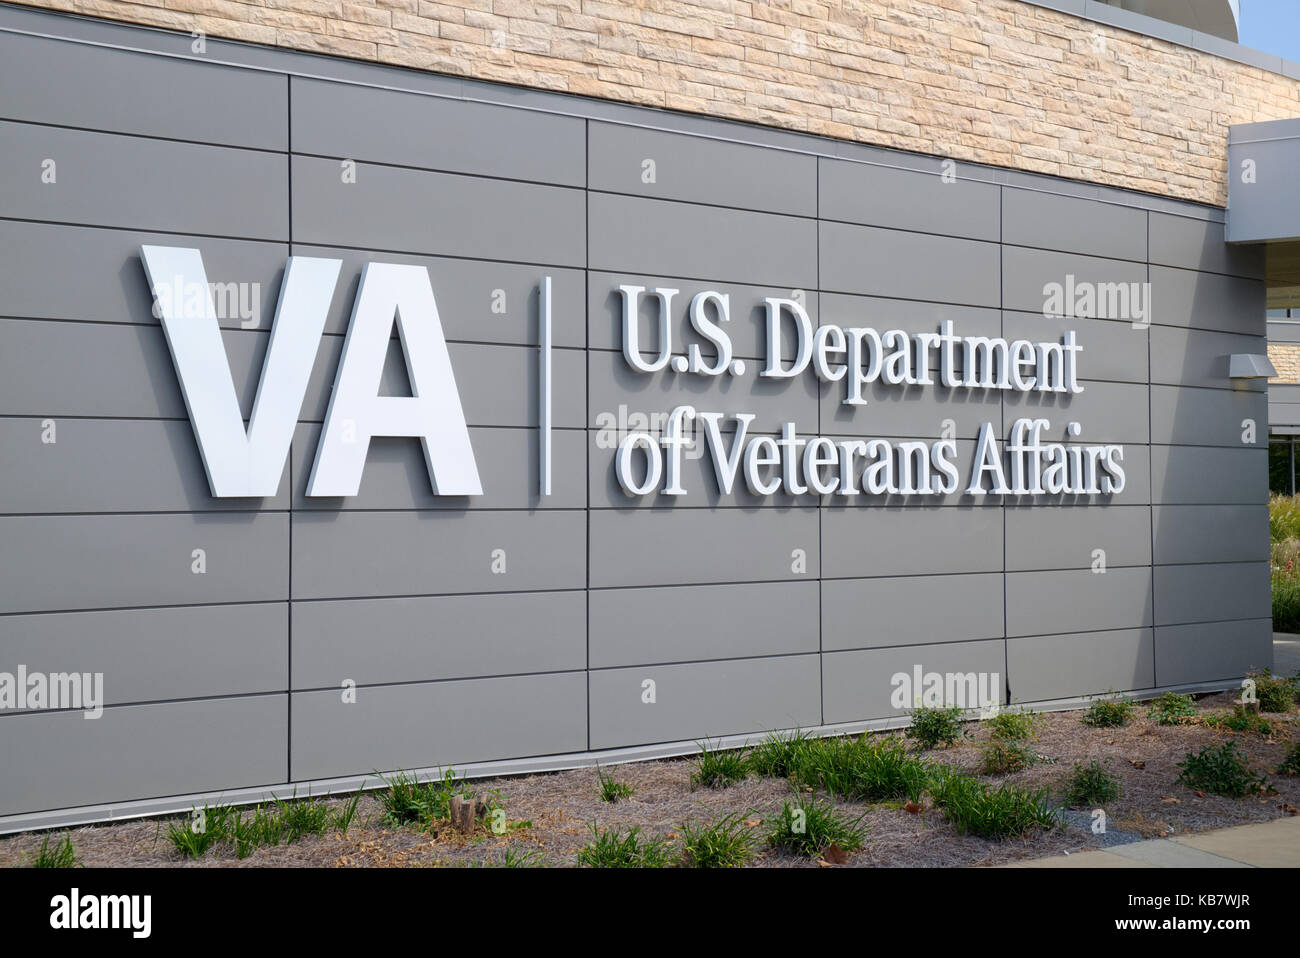 U.S. Department of Veterans Affairs, VA hospital, outpatient clinic in Montgomery, Alabama, United States. Stock Photo